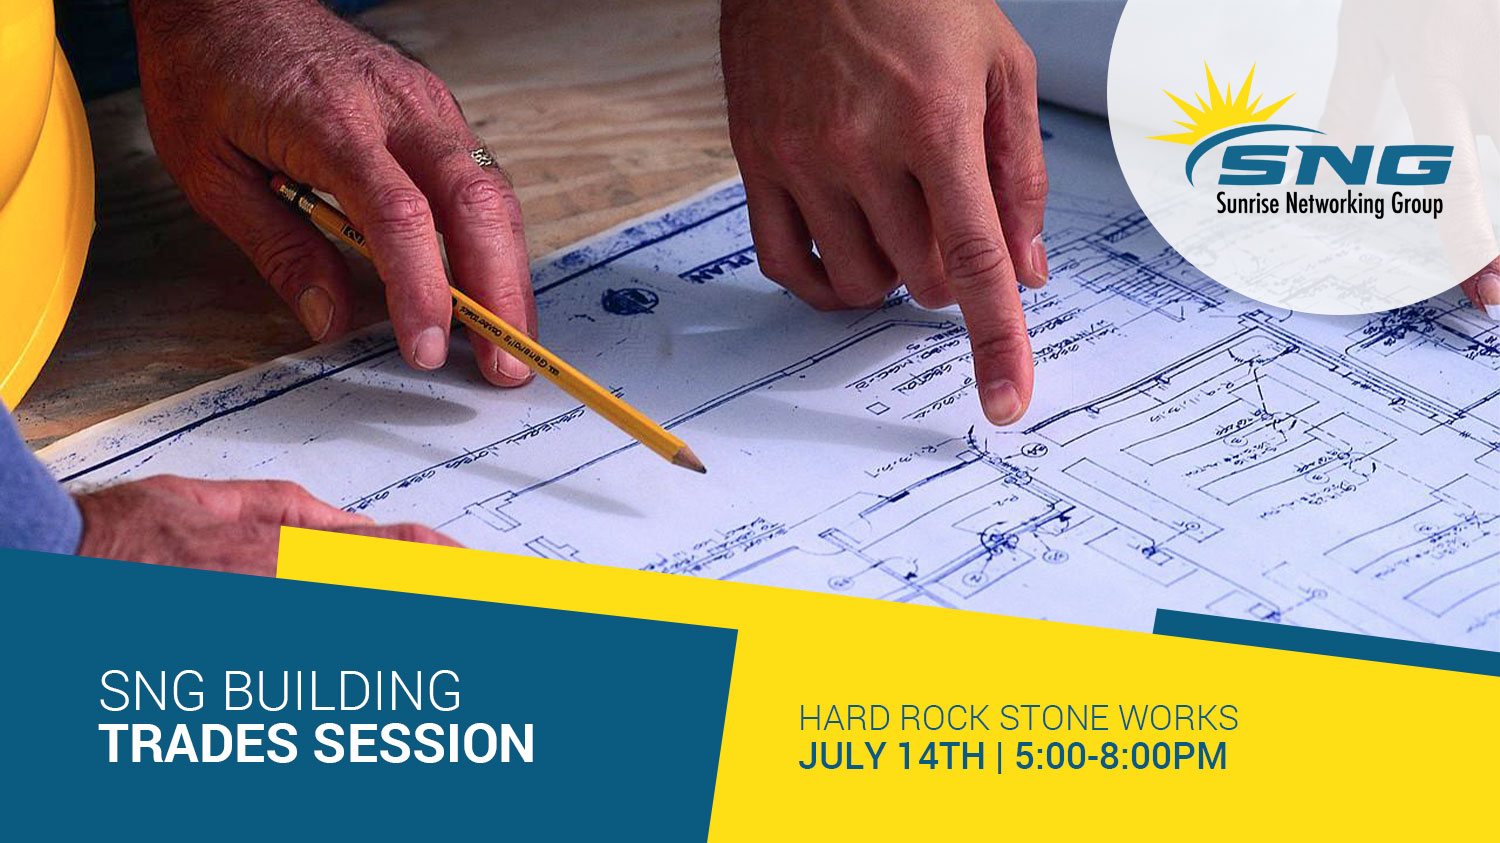 SNG Building Trades Session @ Hard Rock Stone Works